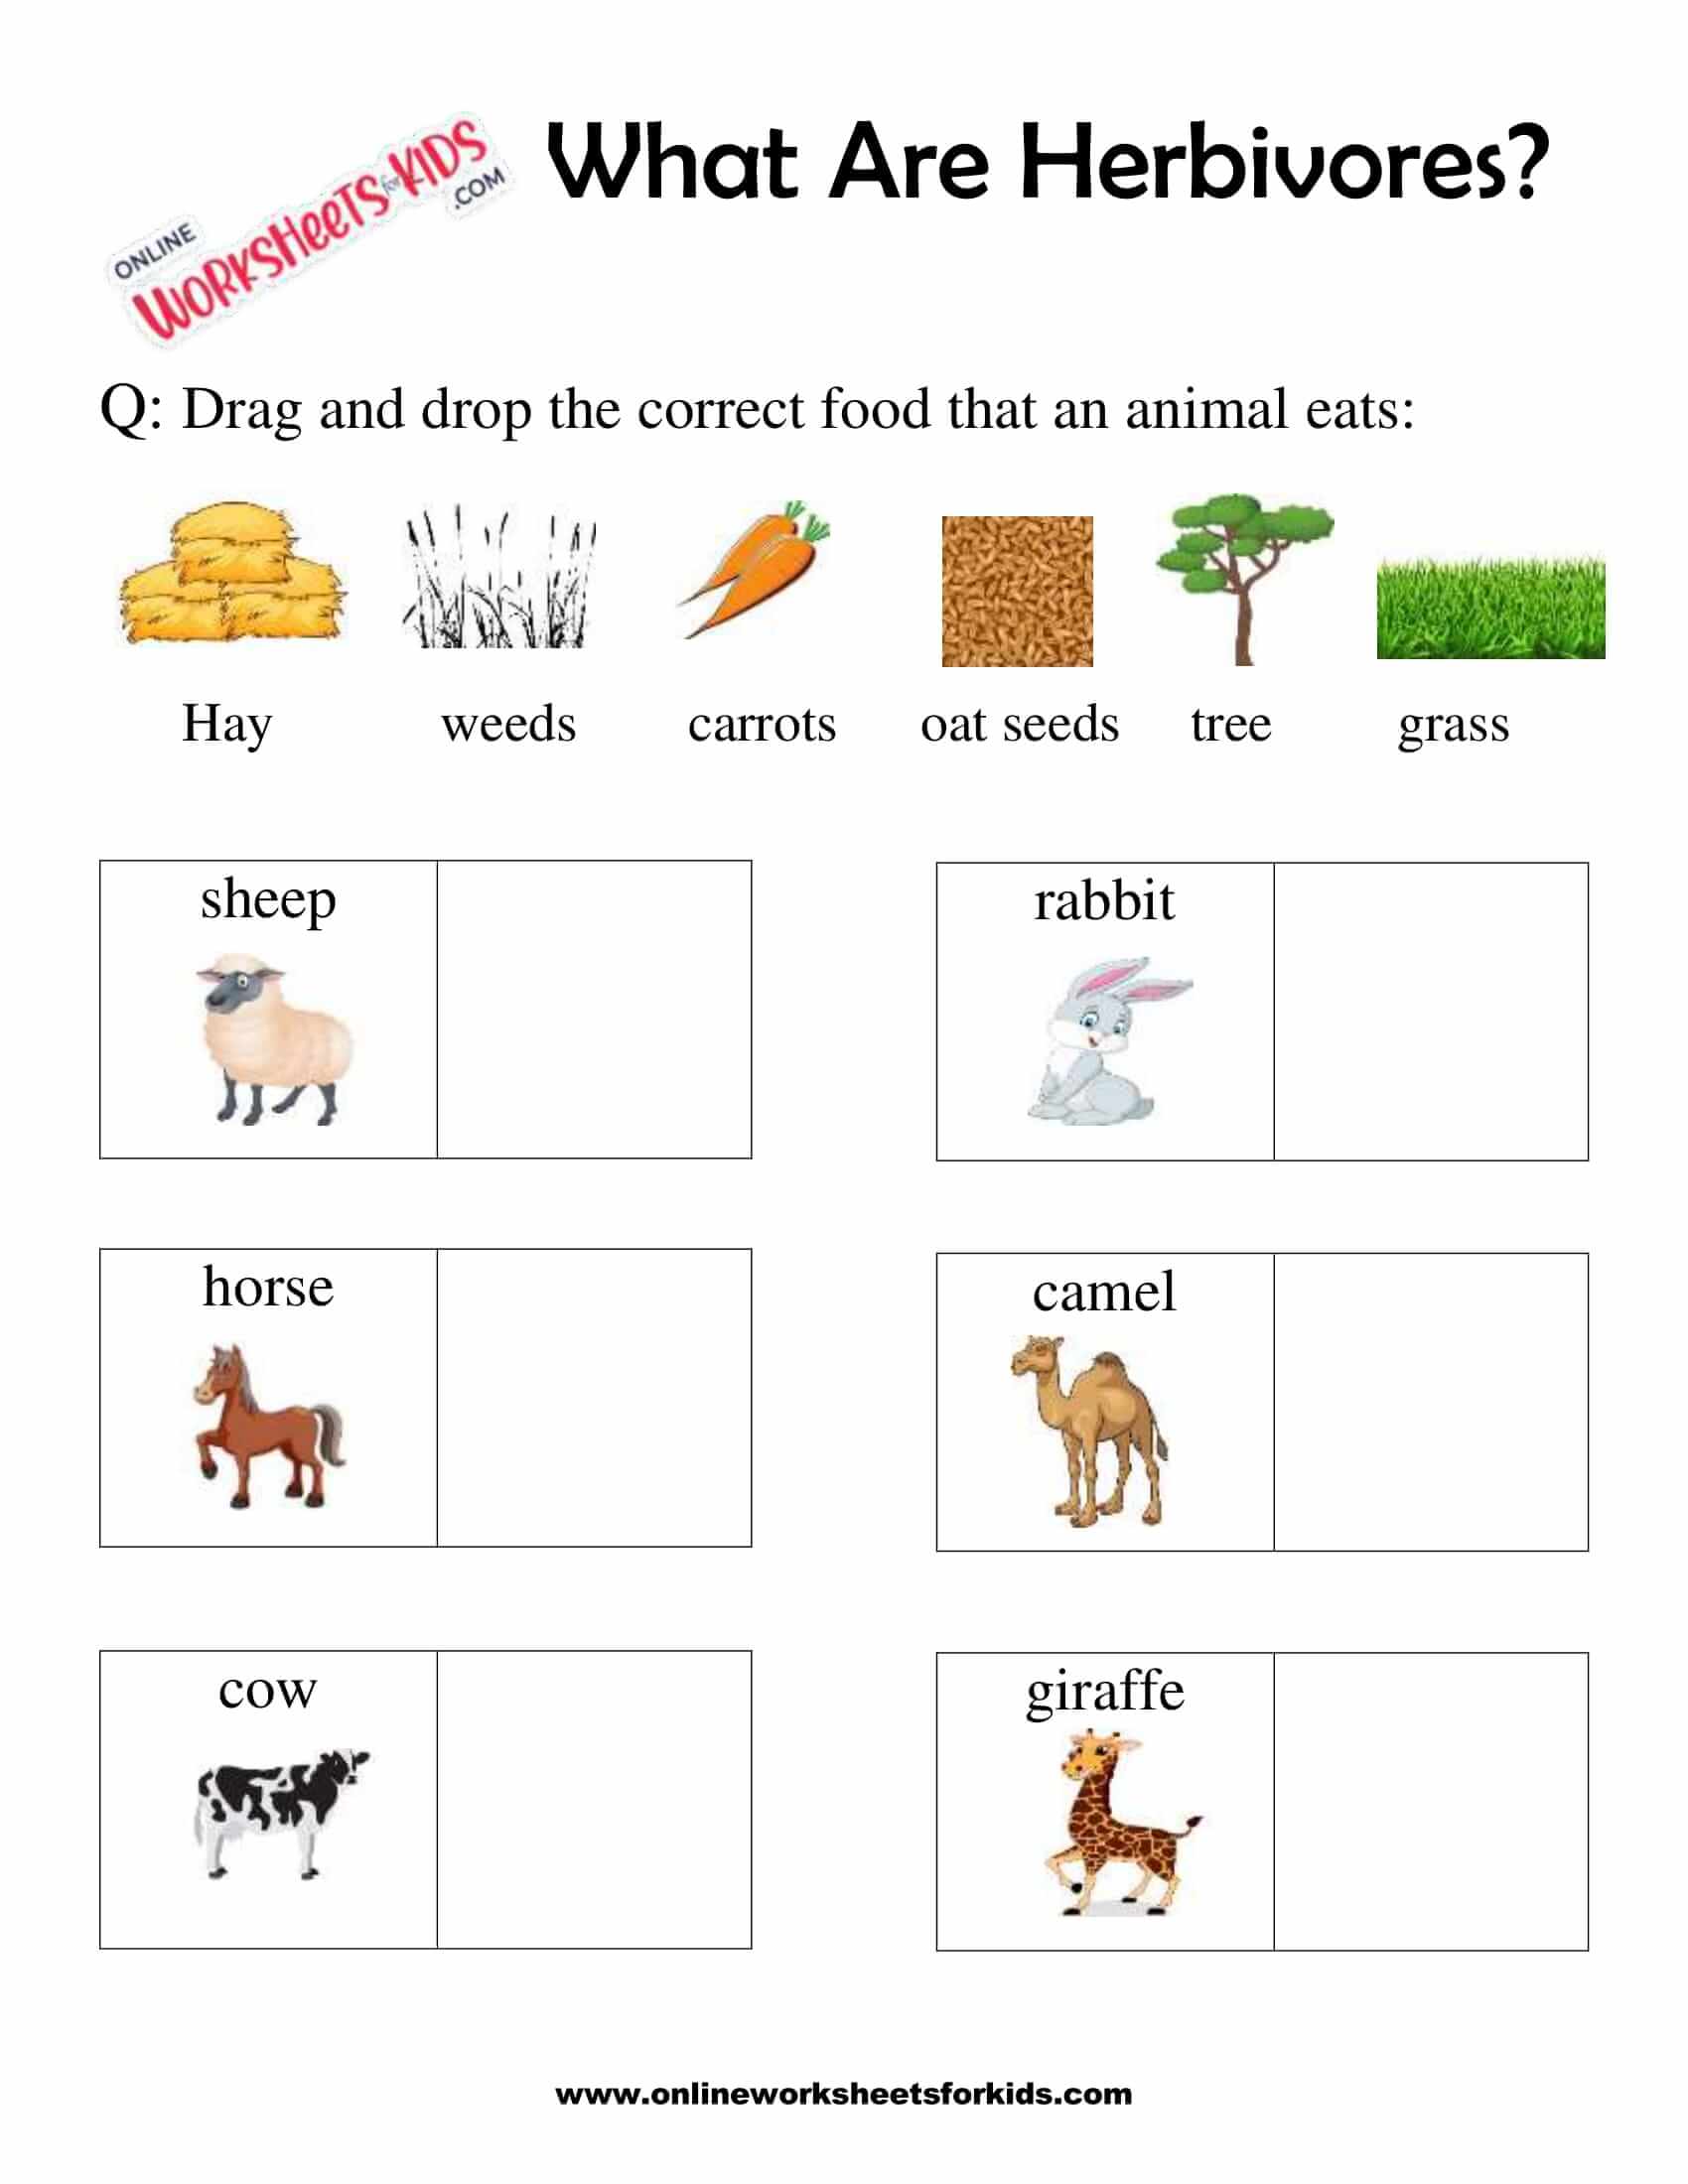 What Are Herbivores Worksheet 04 for Grade 1